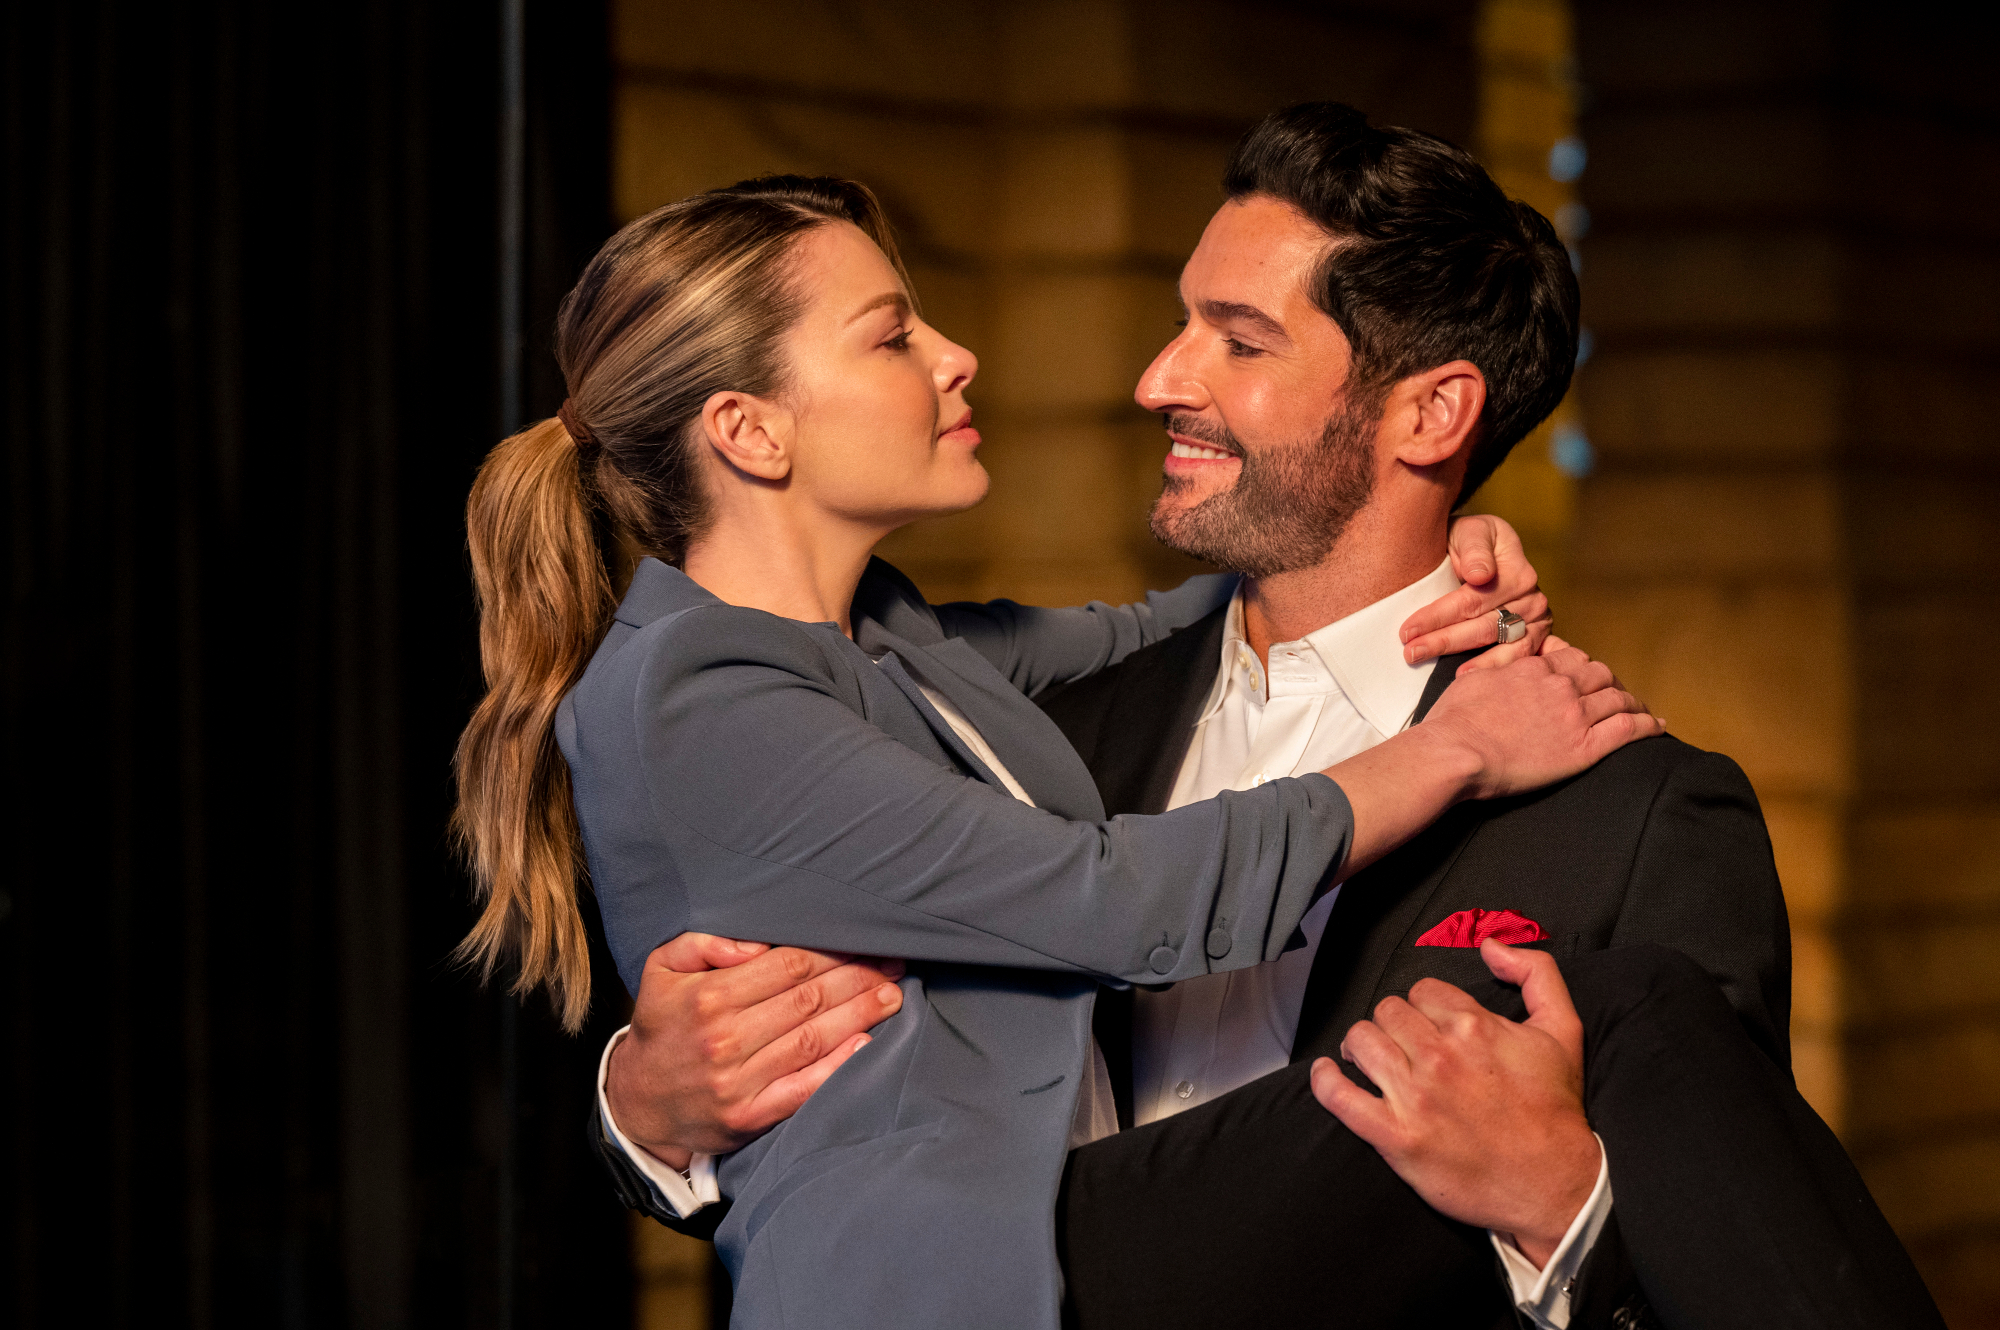 Lauren German and Tom Ellis as Chloe Decker and Lucifer Morningstar in 1 of the episodes from 'Lucifer' Season 6. He's bridal carrying her and they're smiling at one another.